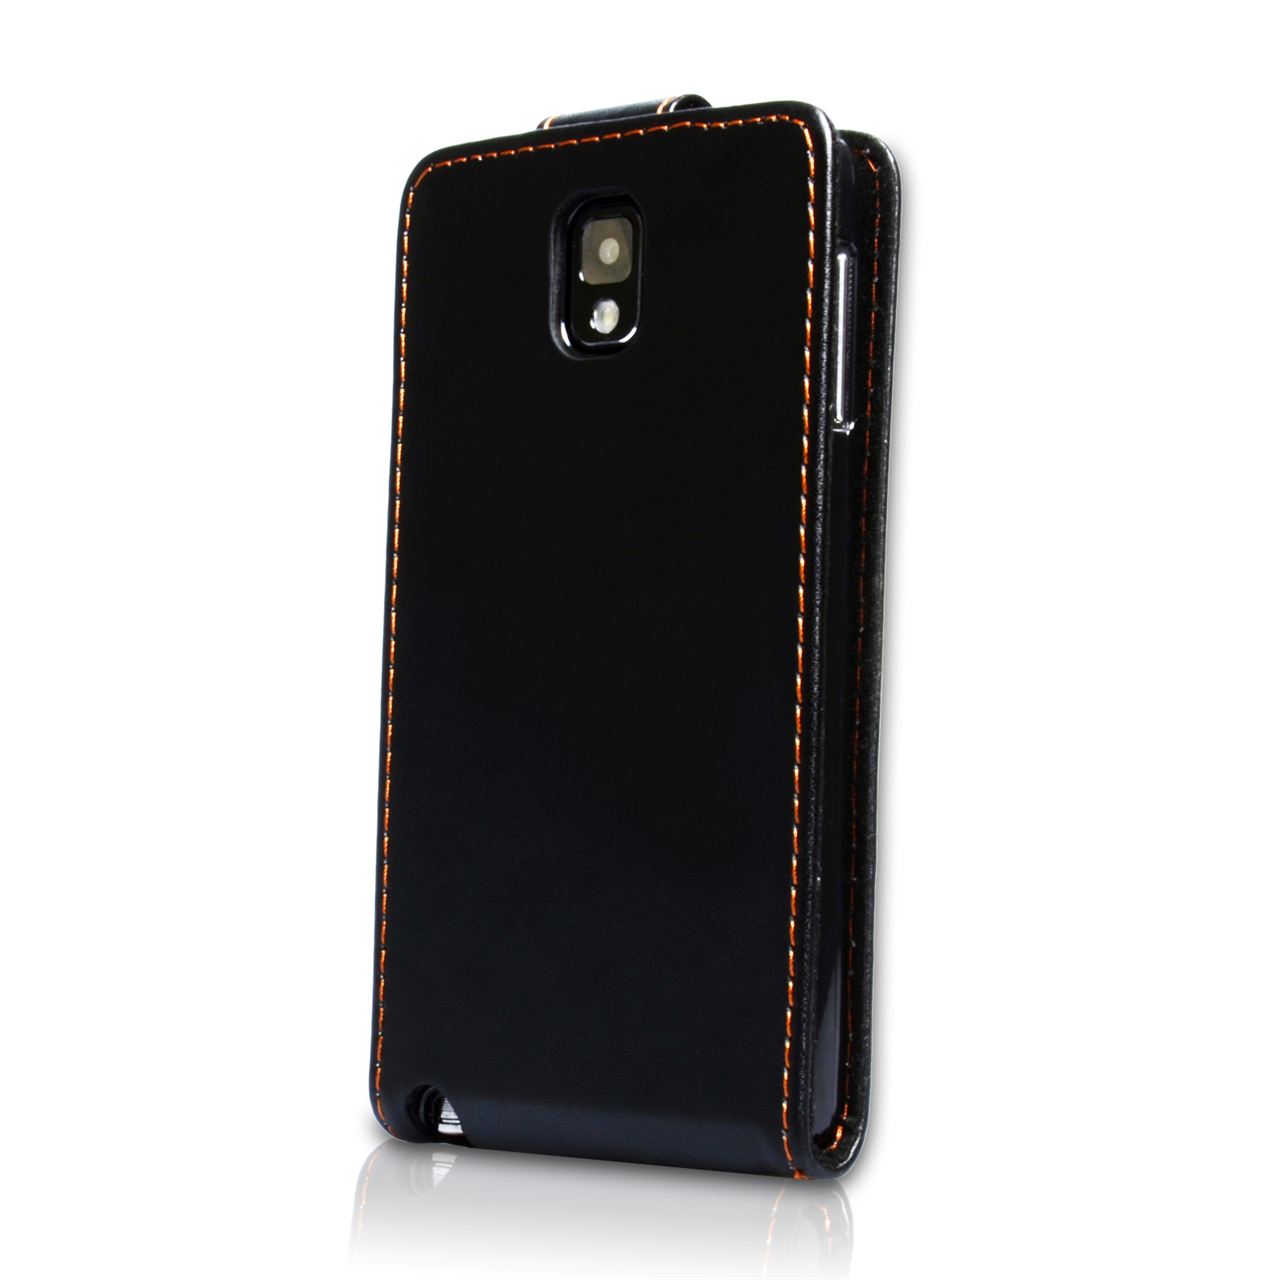 YouSave Accessories Samsung Galaxy Note 3 Leather-Effect 